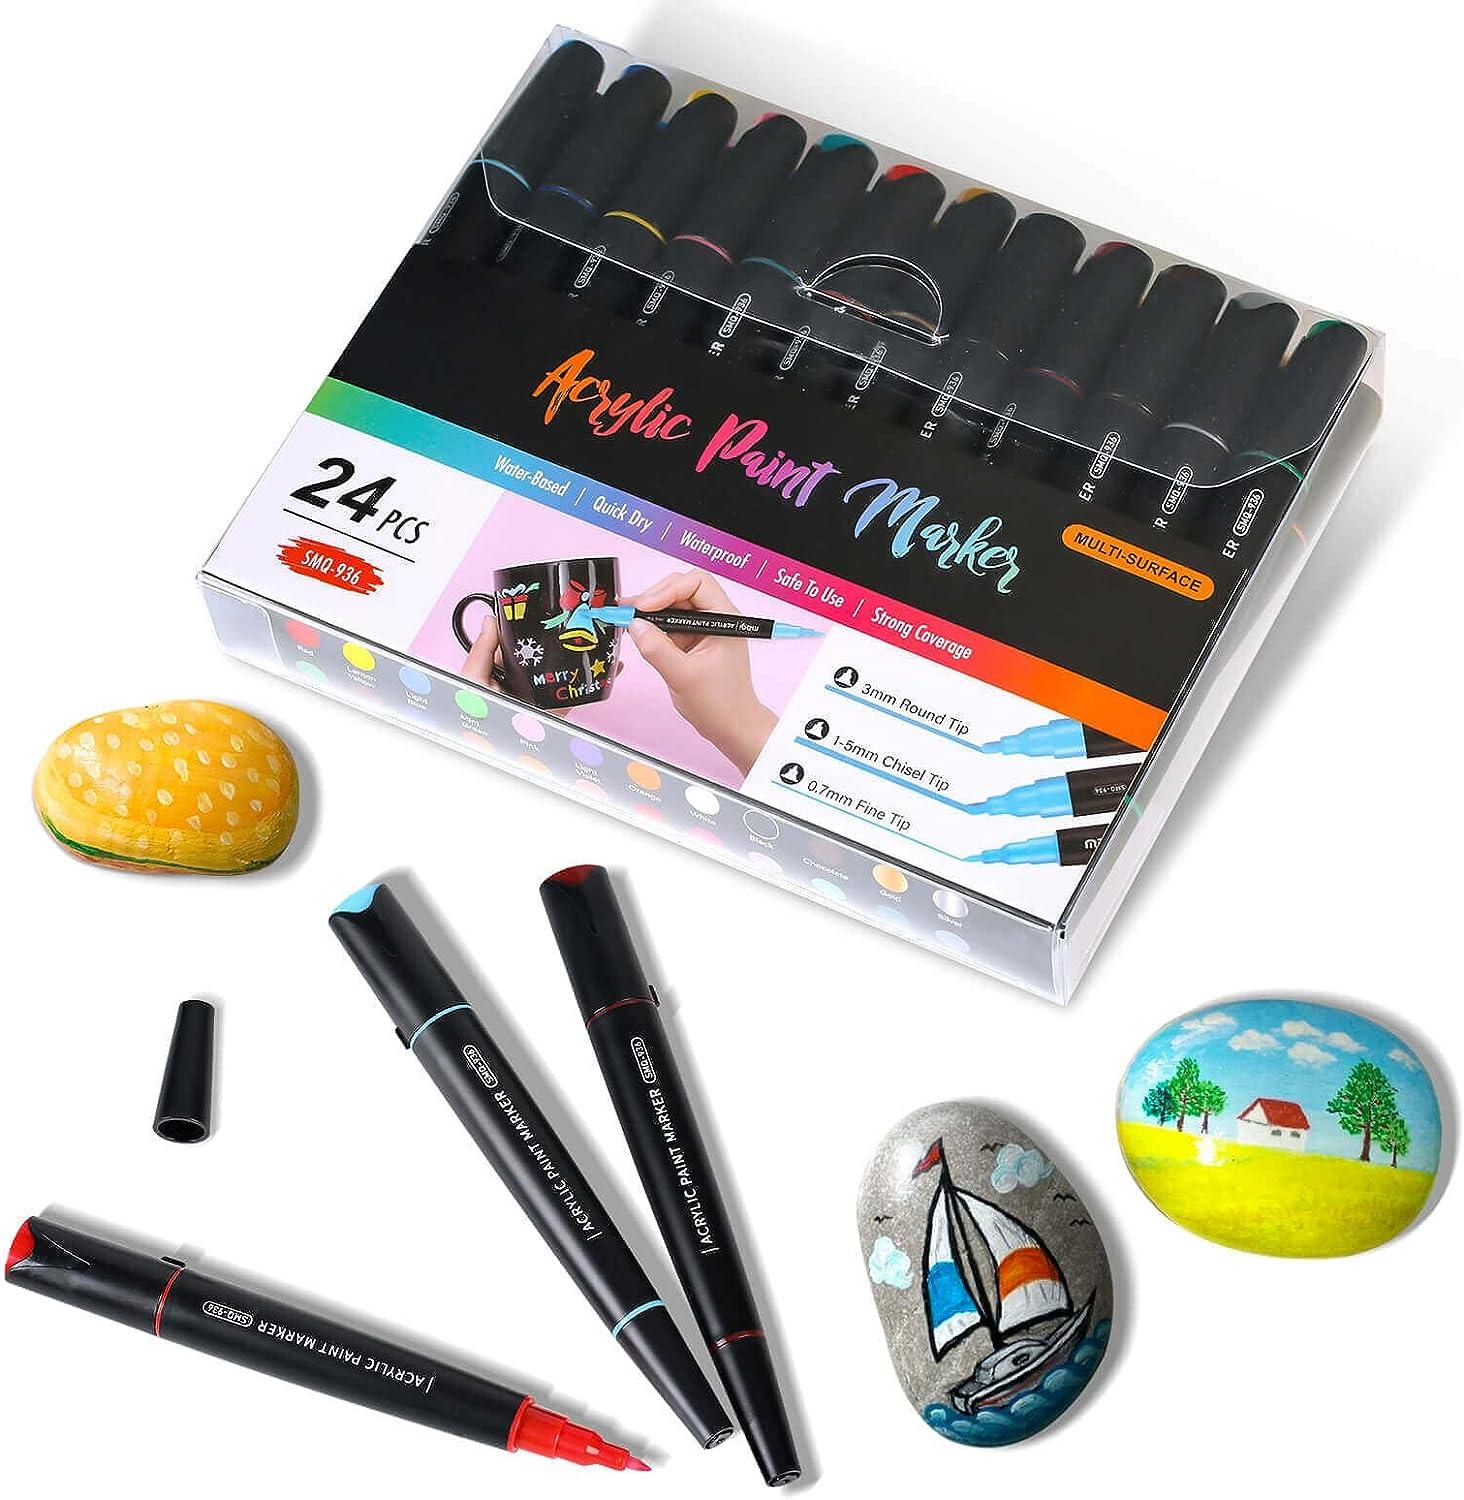 Paint markers guide: how to use paint pens and where to buy them